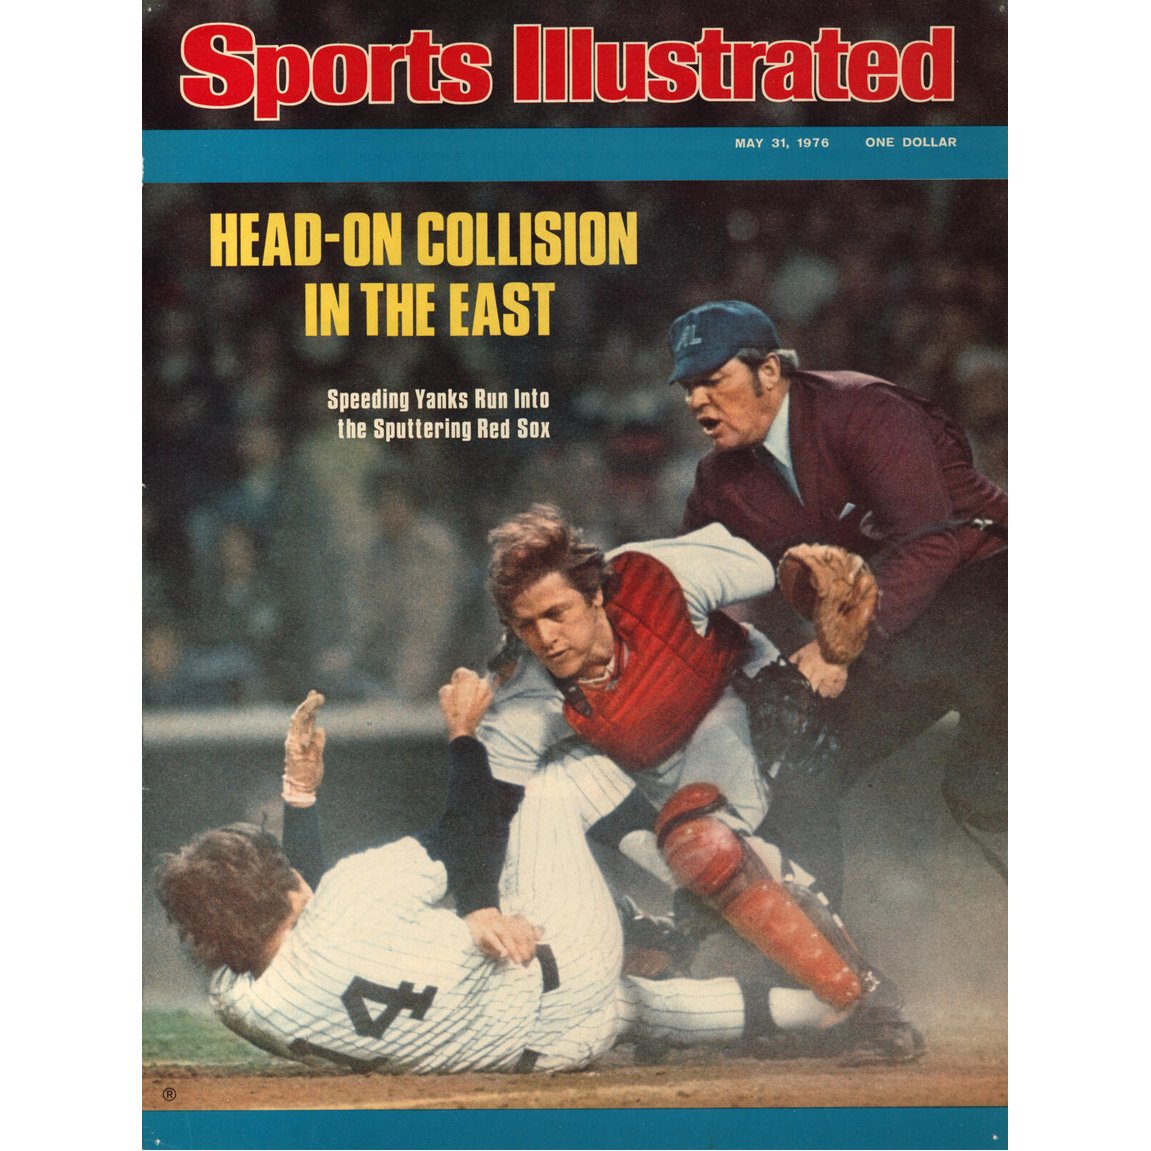 May 31, 1976 Sports Illustrated Cover: Carlton Fisk of the Boston Red Sox tags the New York Yankees’ Lou Piniella out at home plate at Yankee Stadium. Bronx, New York. #NeilLeifer #Photography #Baseball #Yankees #RedSox #YankeeStadium #SportsIllustrated #Players